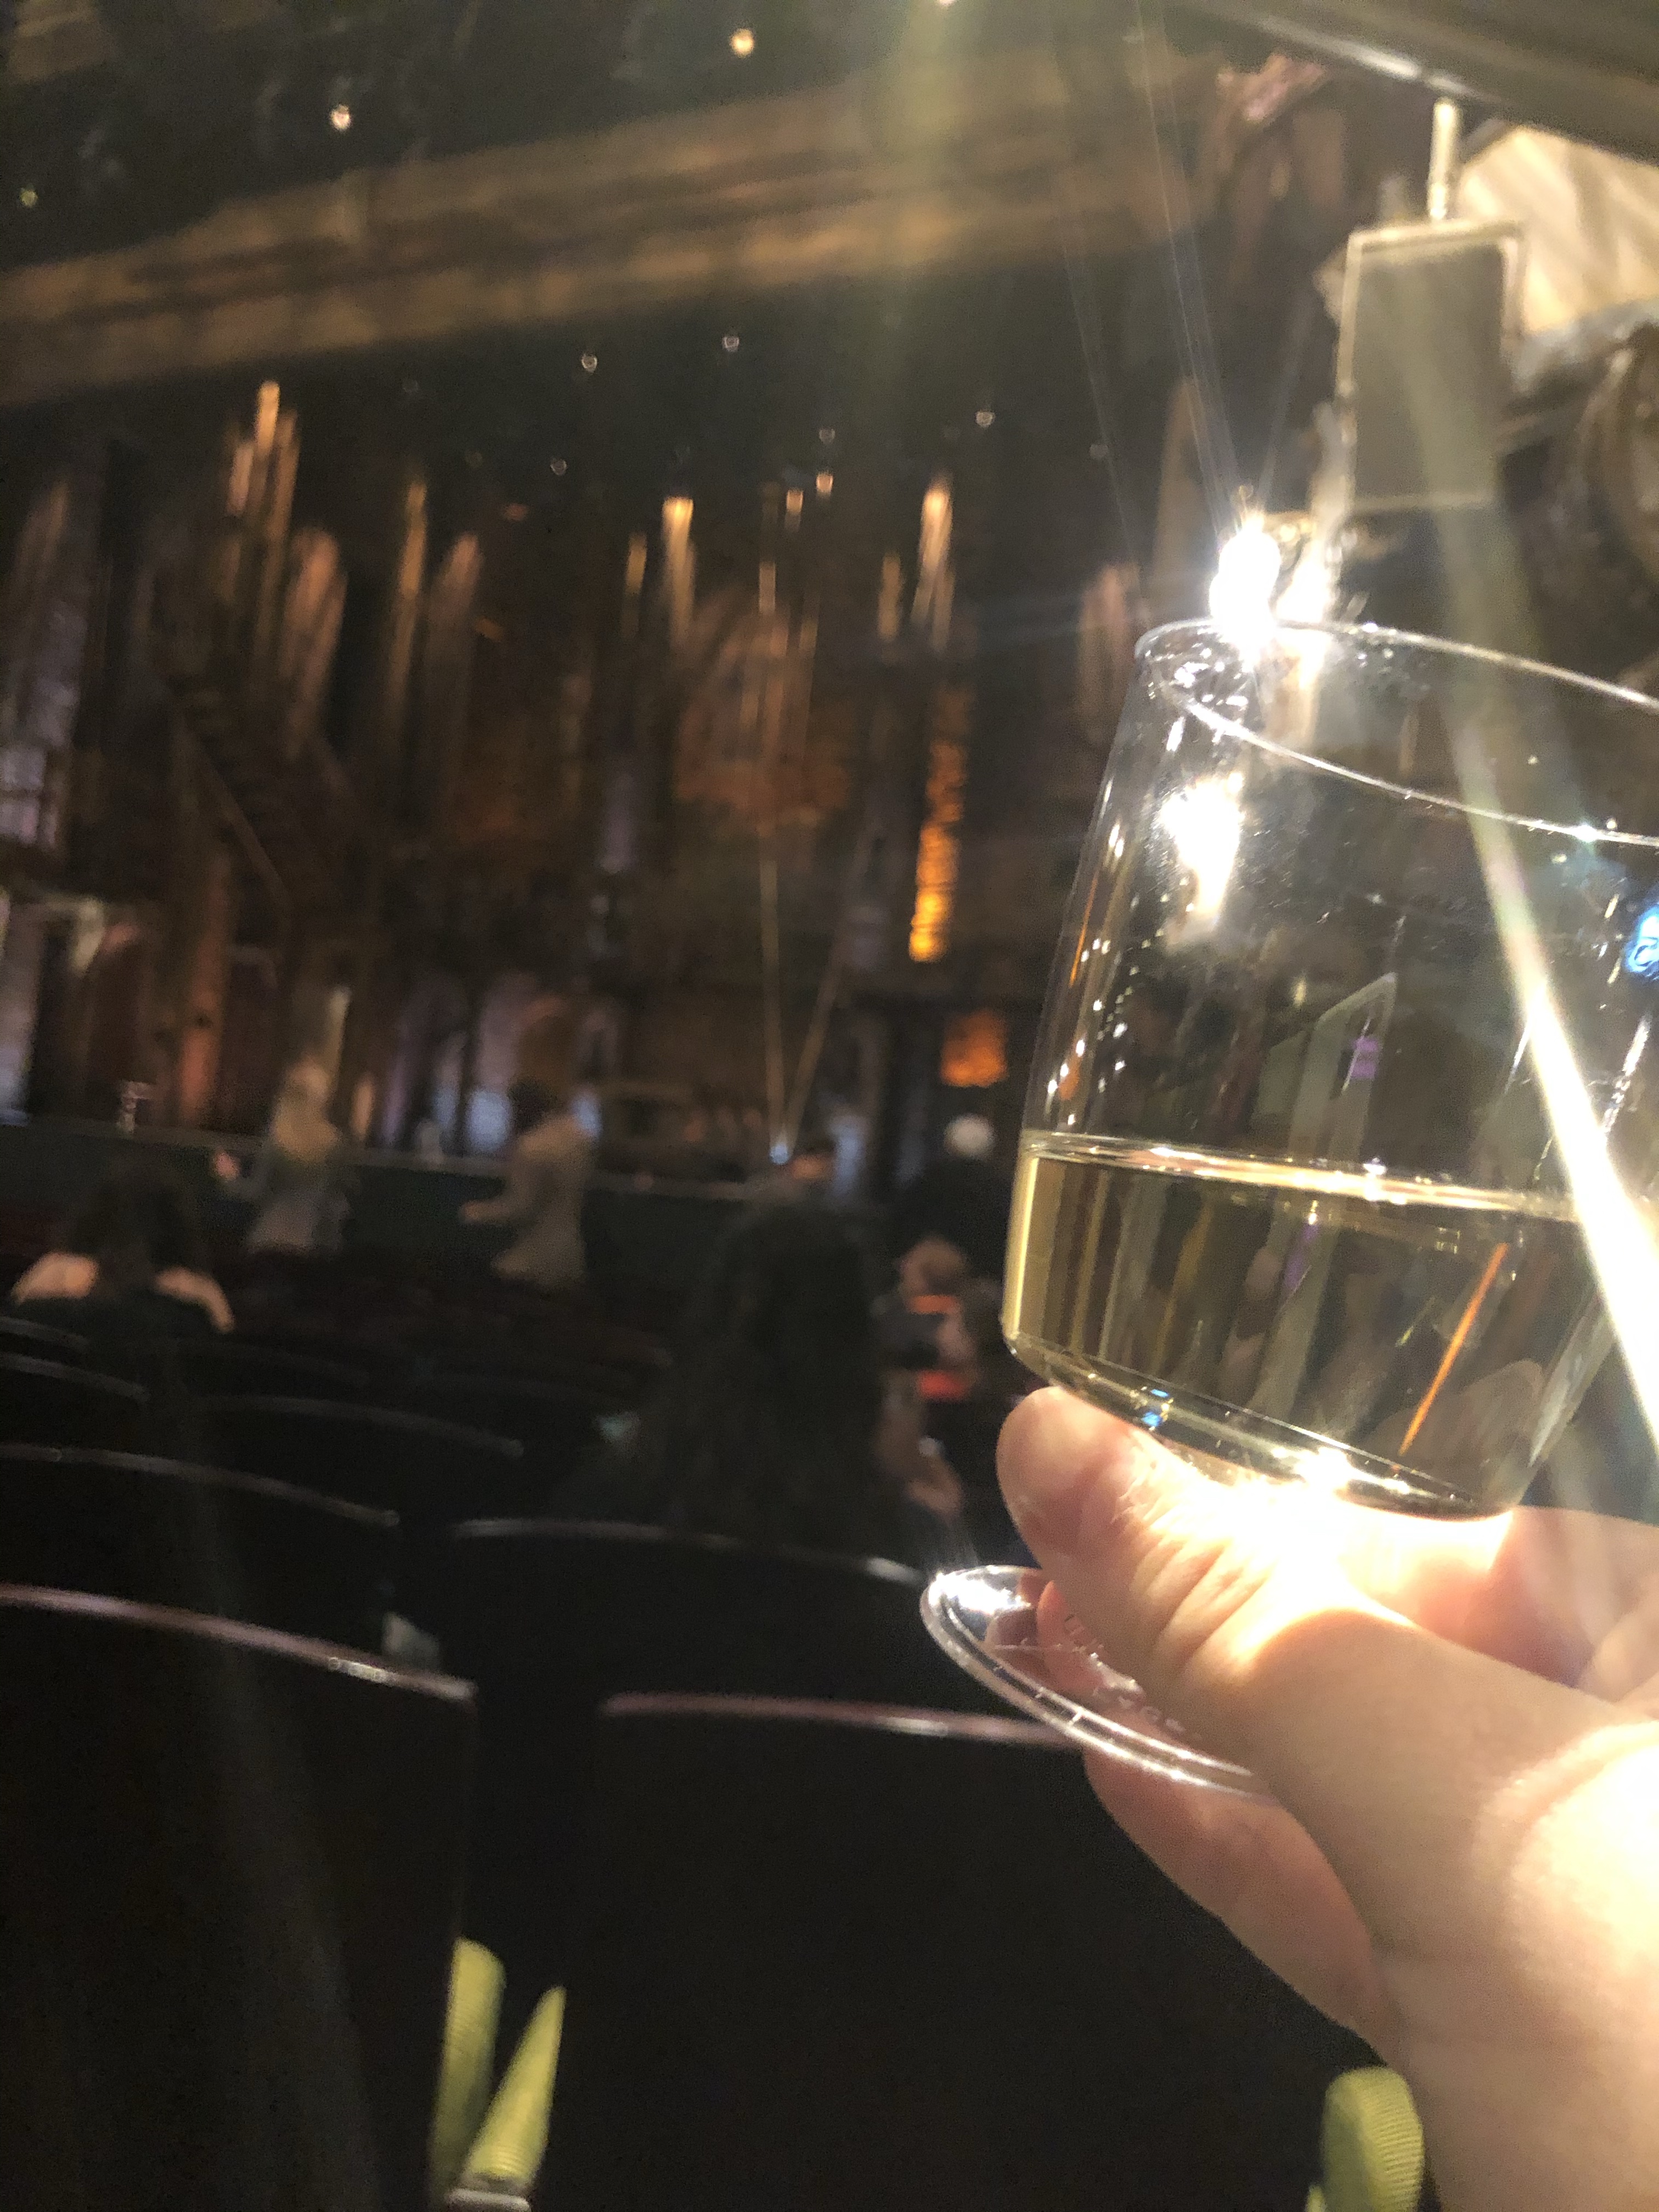 A cup of wine lifted in front of the Hamilton stage.